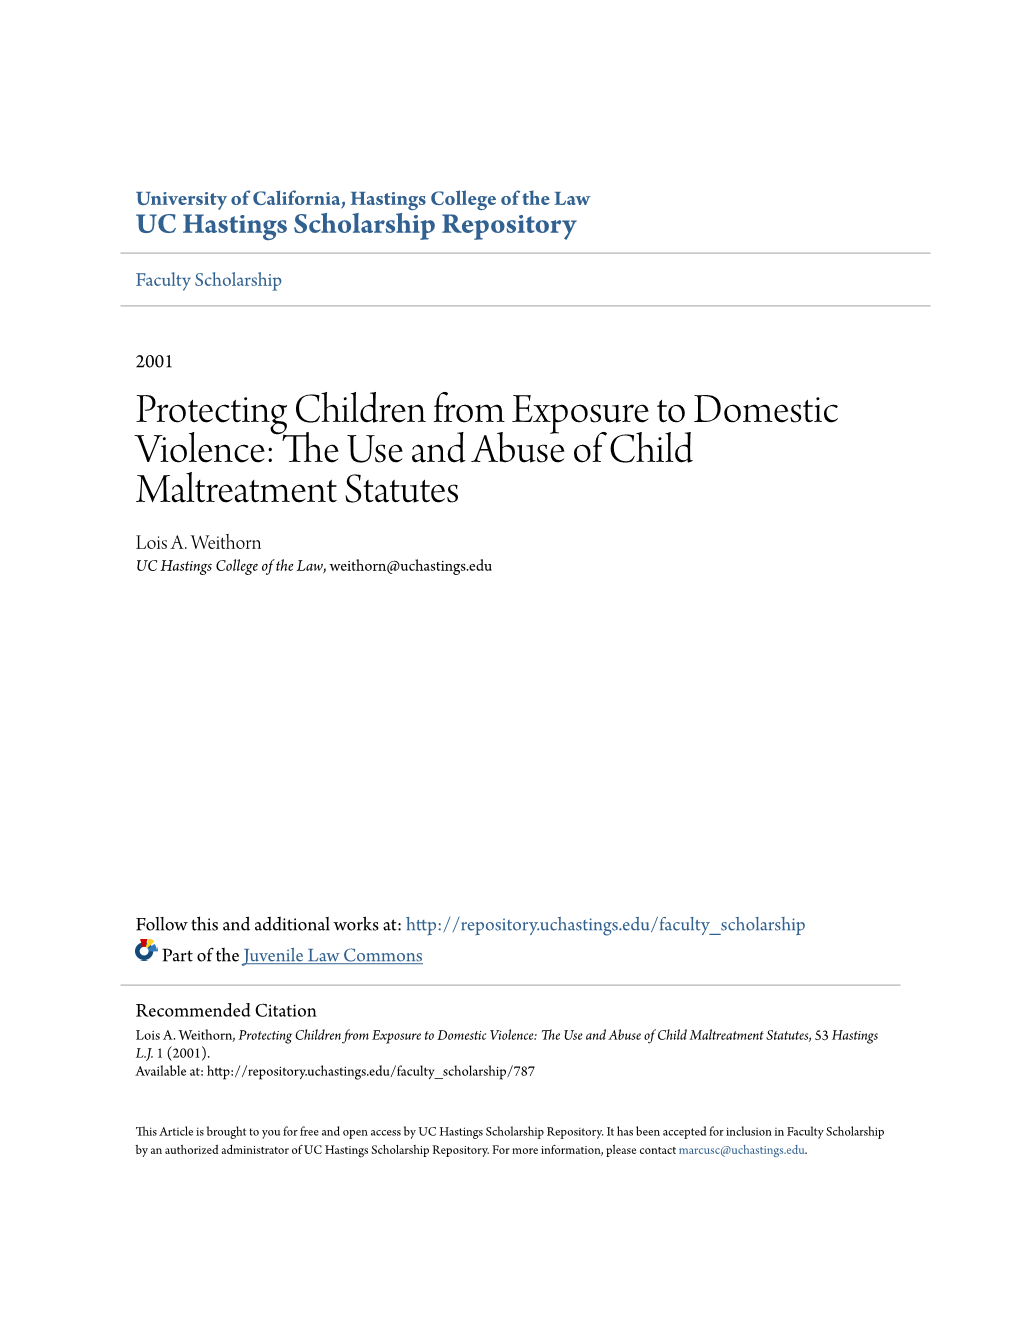 Protecting Children from Exposure to Domestic Violence: the Use and Abuse of Child Maltreatment Statutes, 53 Hastings L.J